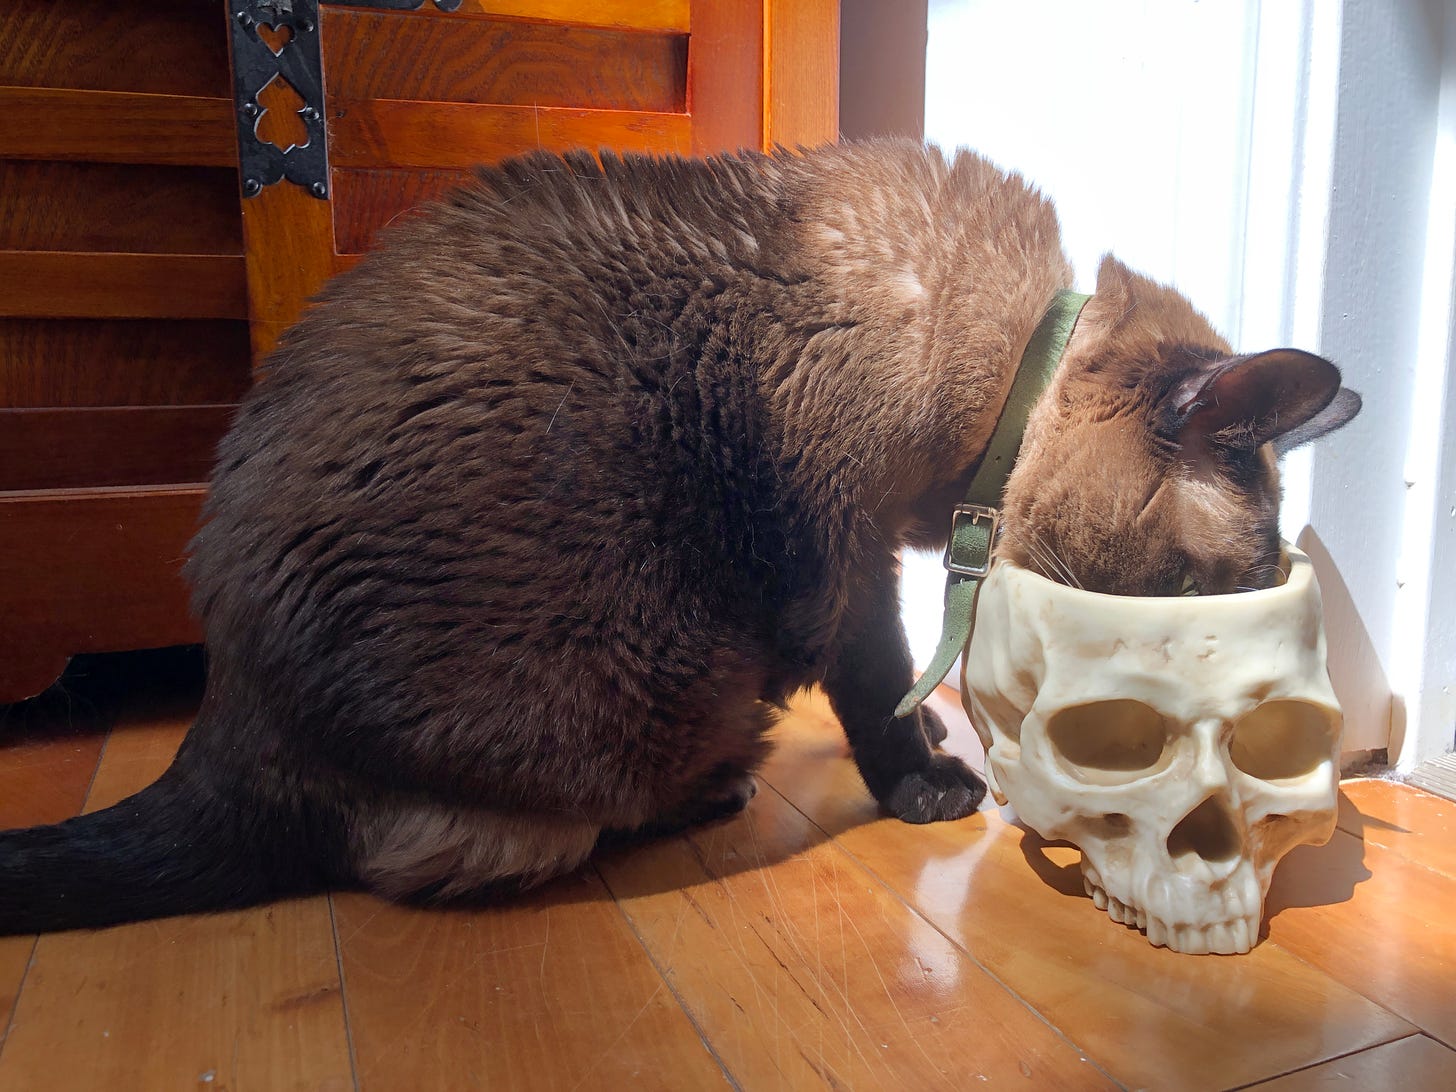 Cocoa, a Tonkinese cat, drinking from a skull. She's getting her whole face in there.